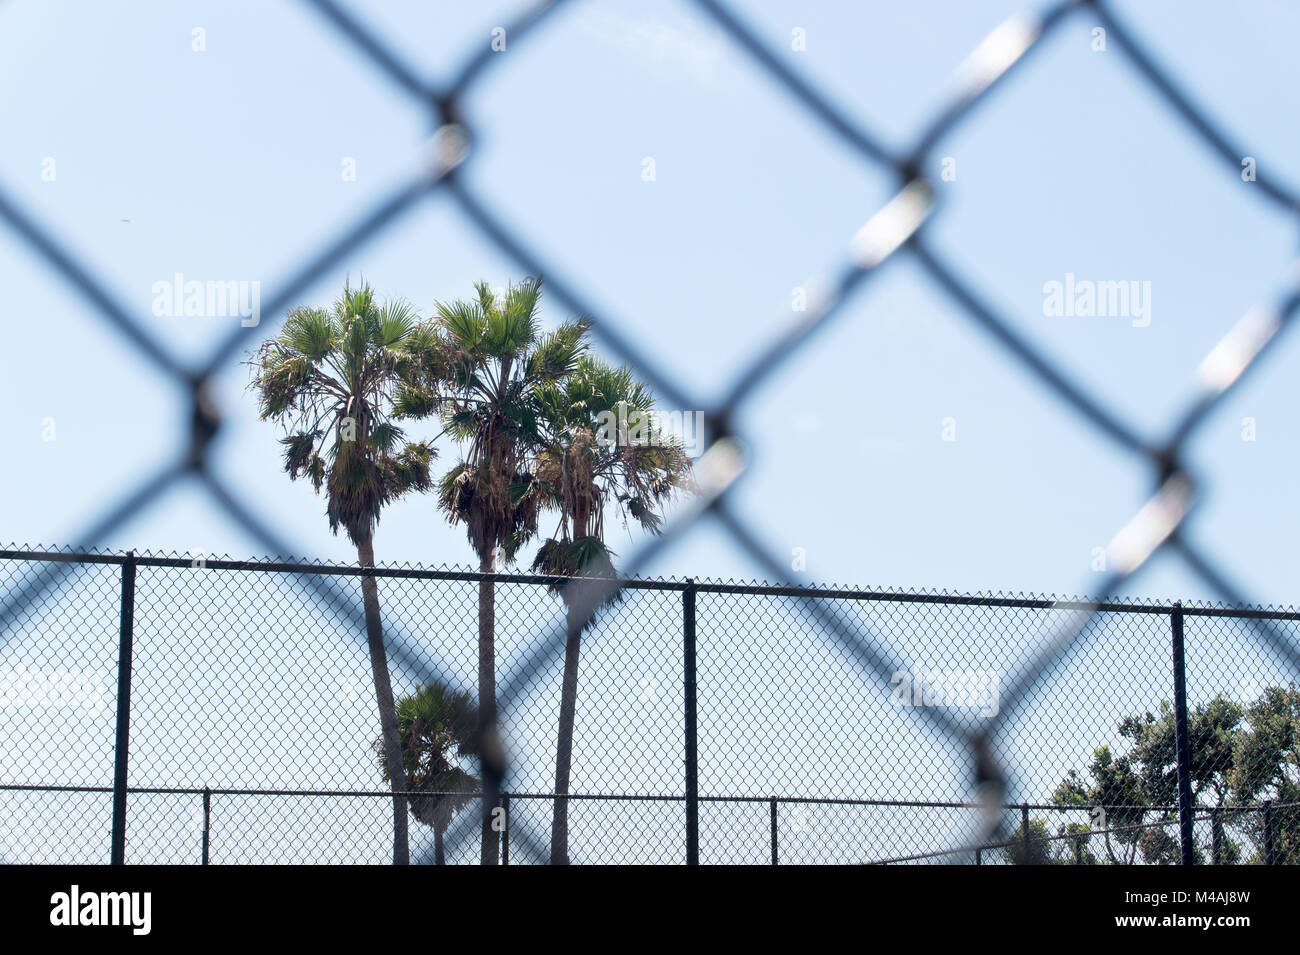 Palm trees framed by chain link fence in prison, gulag, labour camp, school or unwanted institution. Dreaming of freedom. Stock Photo